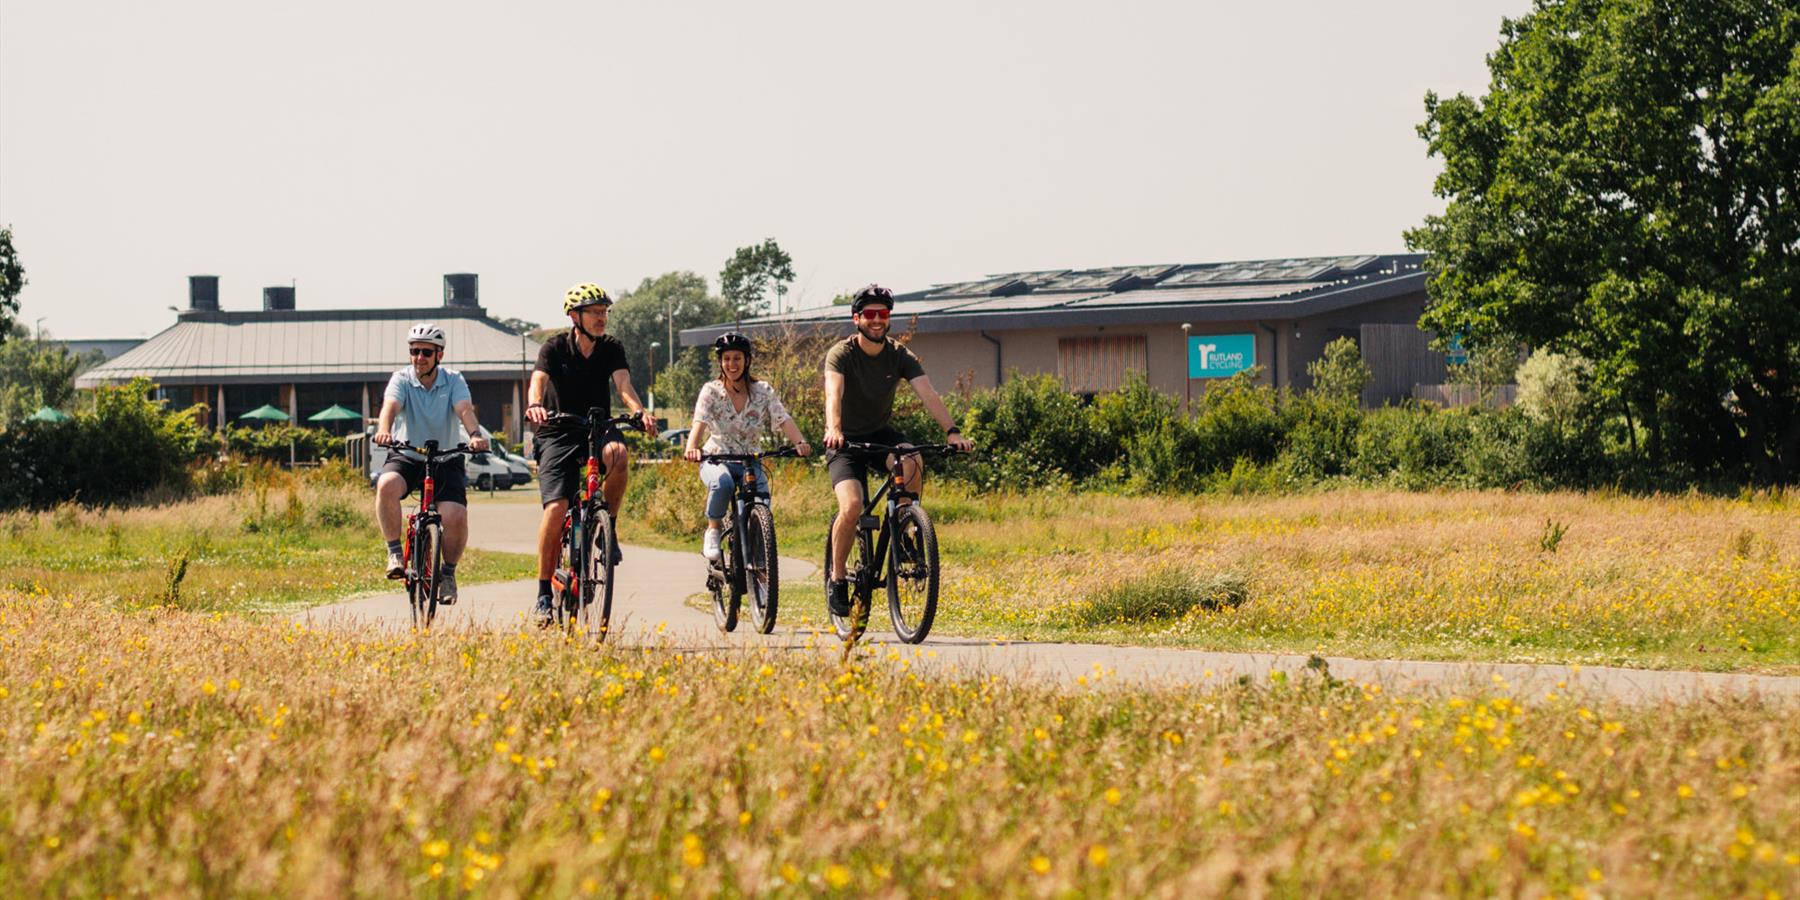 Rutland Cycling Corporate & Group Cycle Hire - Everards Meadows